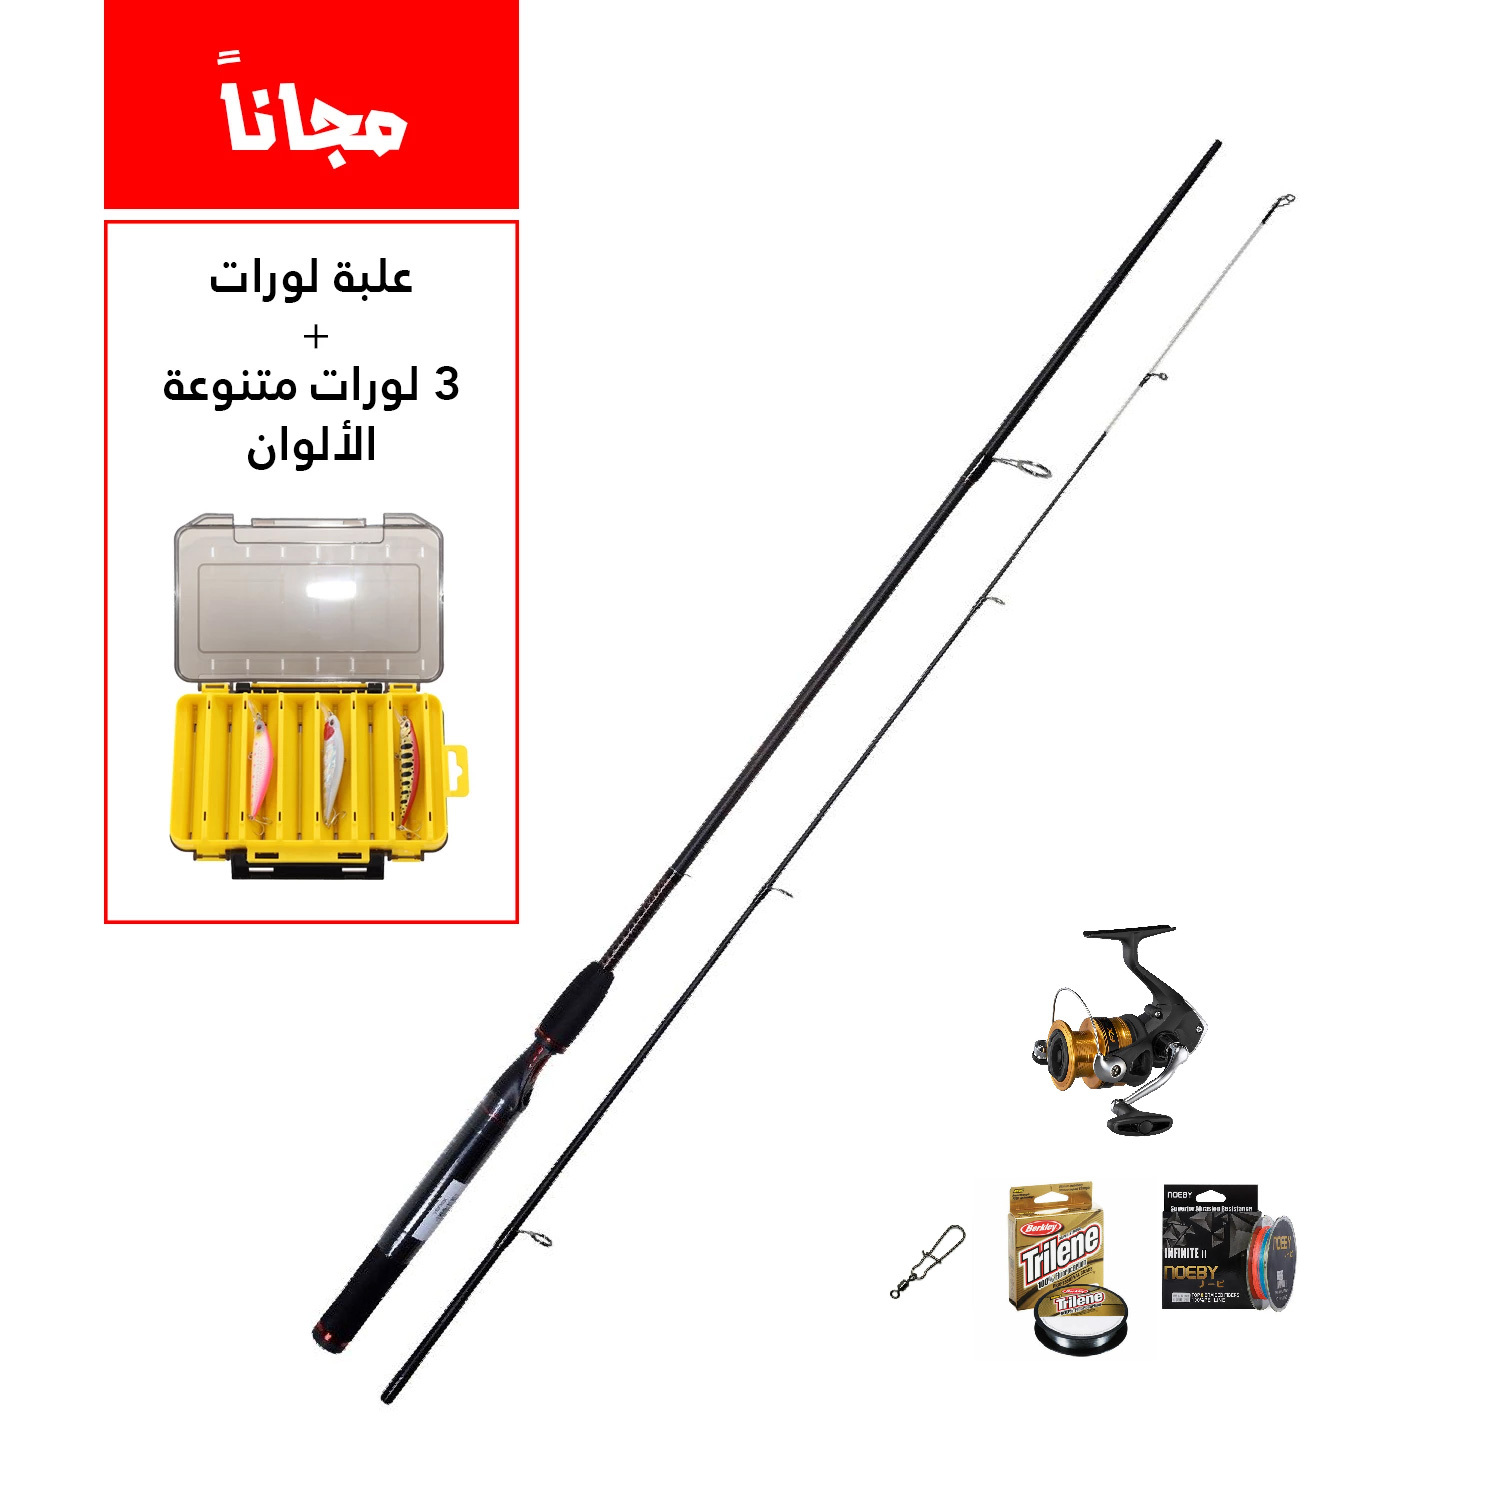 CASTING (UGLY STICK SHAKESPEARE GX2 2.7M ROD & SHIMANO FX 4000) COMBO